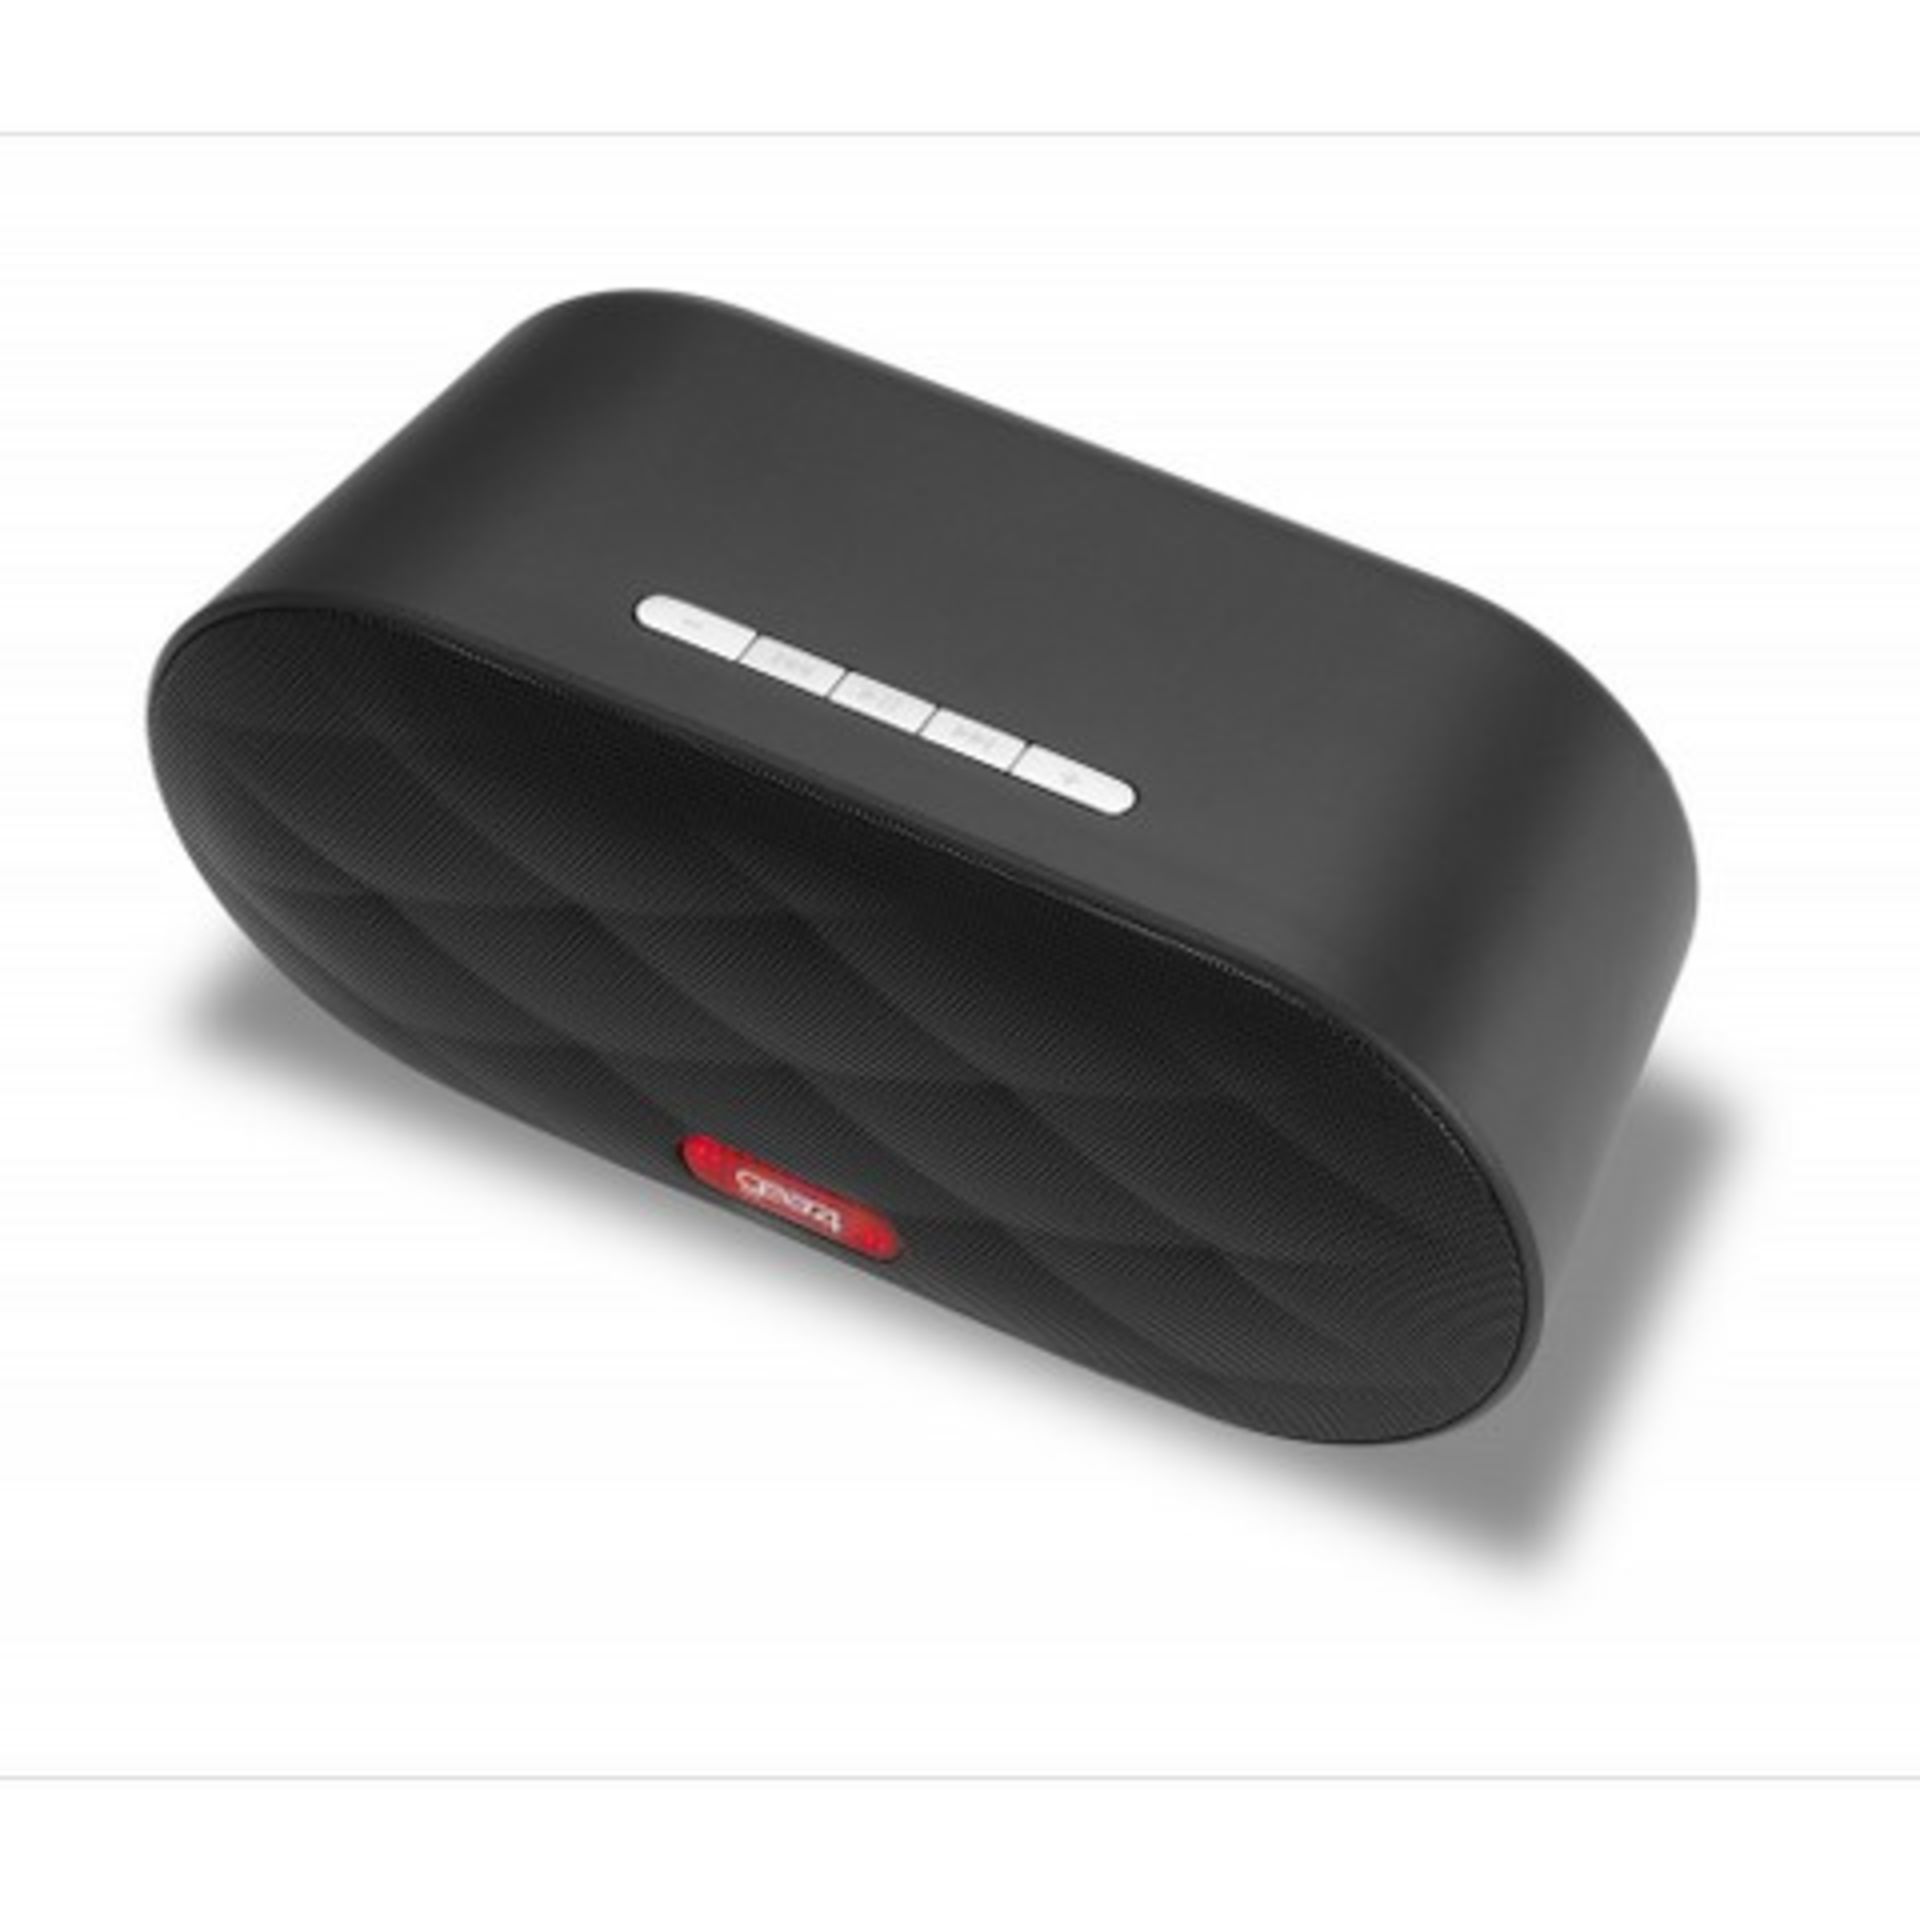 V Brand New Gear4 XOME Stereo Bluetooth Speaker - RRP £79.99 - Stream Music From Bluetooth Devices - Image 3 of 6